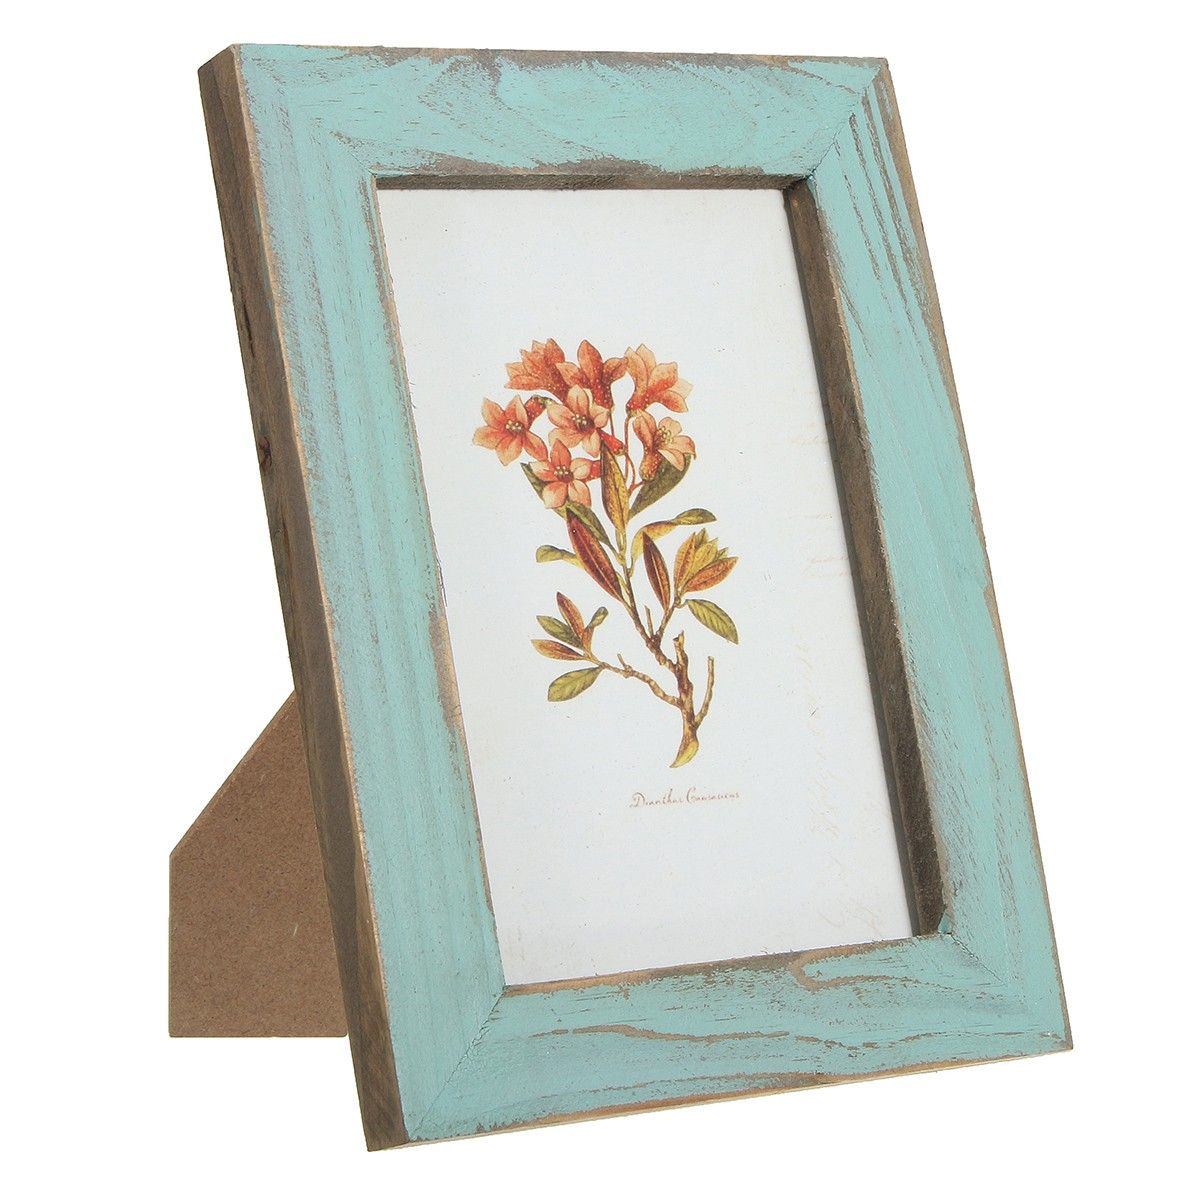 Vintage-5inch-Solid-Wood-Photo-Picture-Frame-Wall-Hanging-Shabby-Chic-Room-Decor-1252351